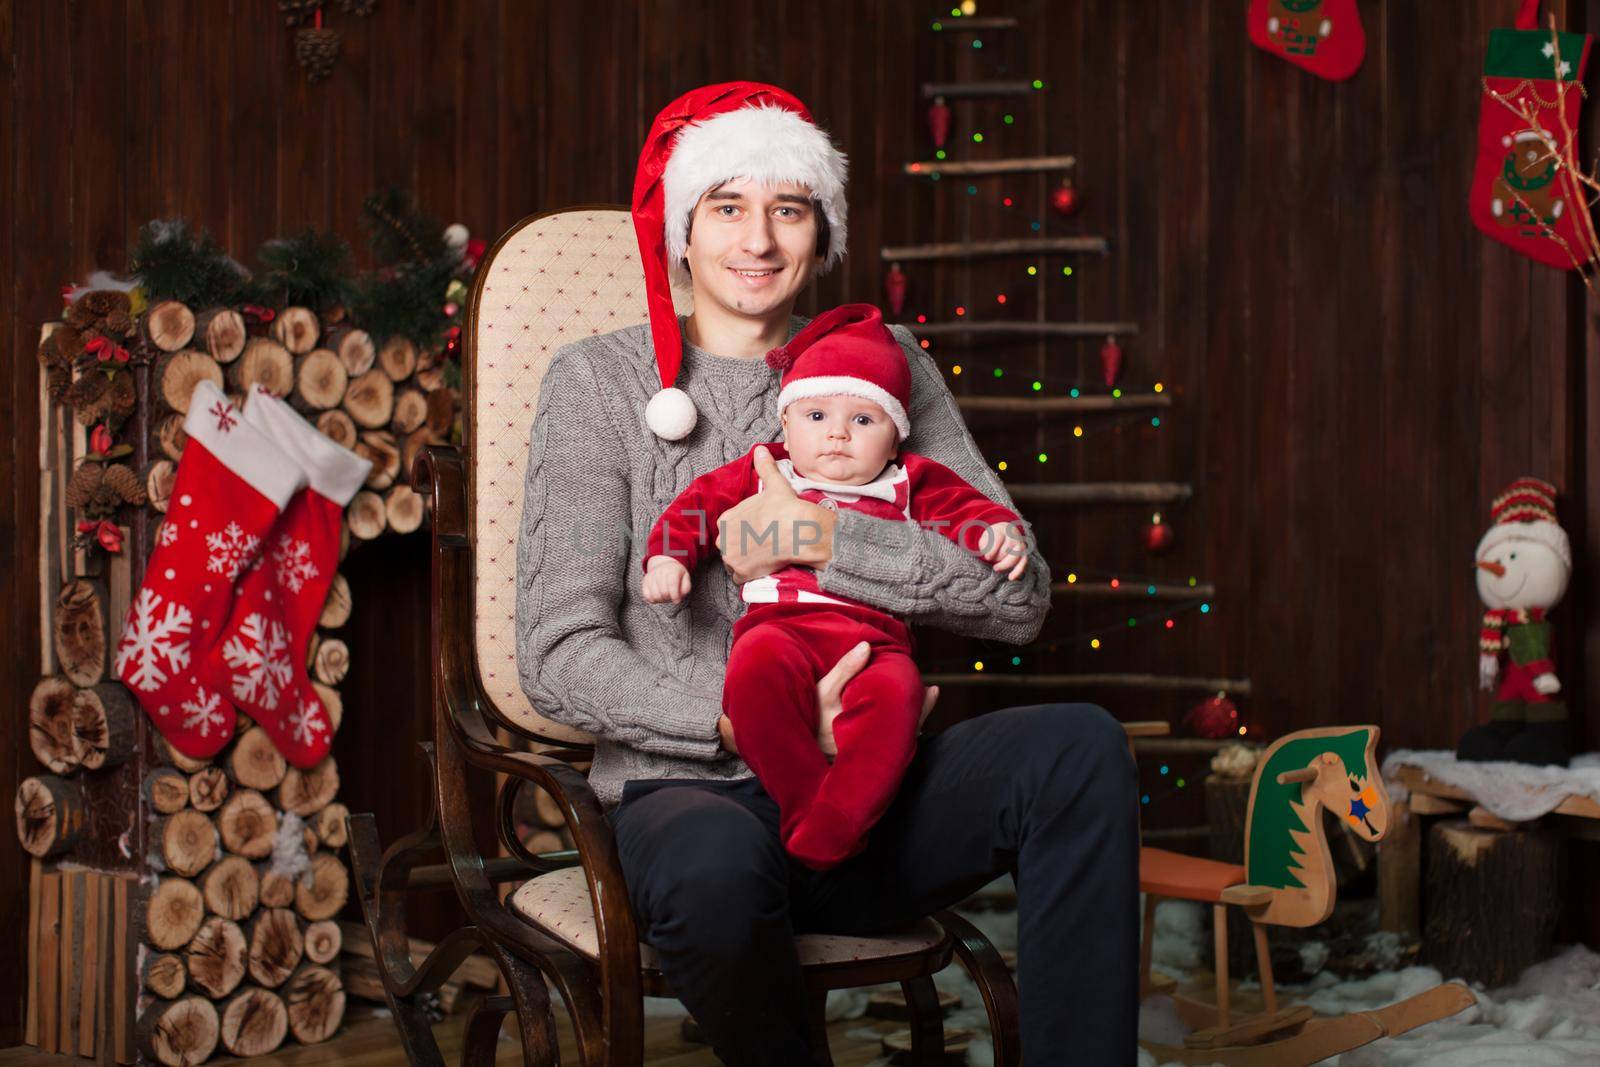 A man with a child dressed as Santa Claus on an armchair by a wooden fireplace on New Year's Eve